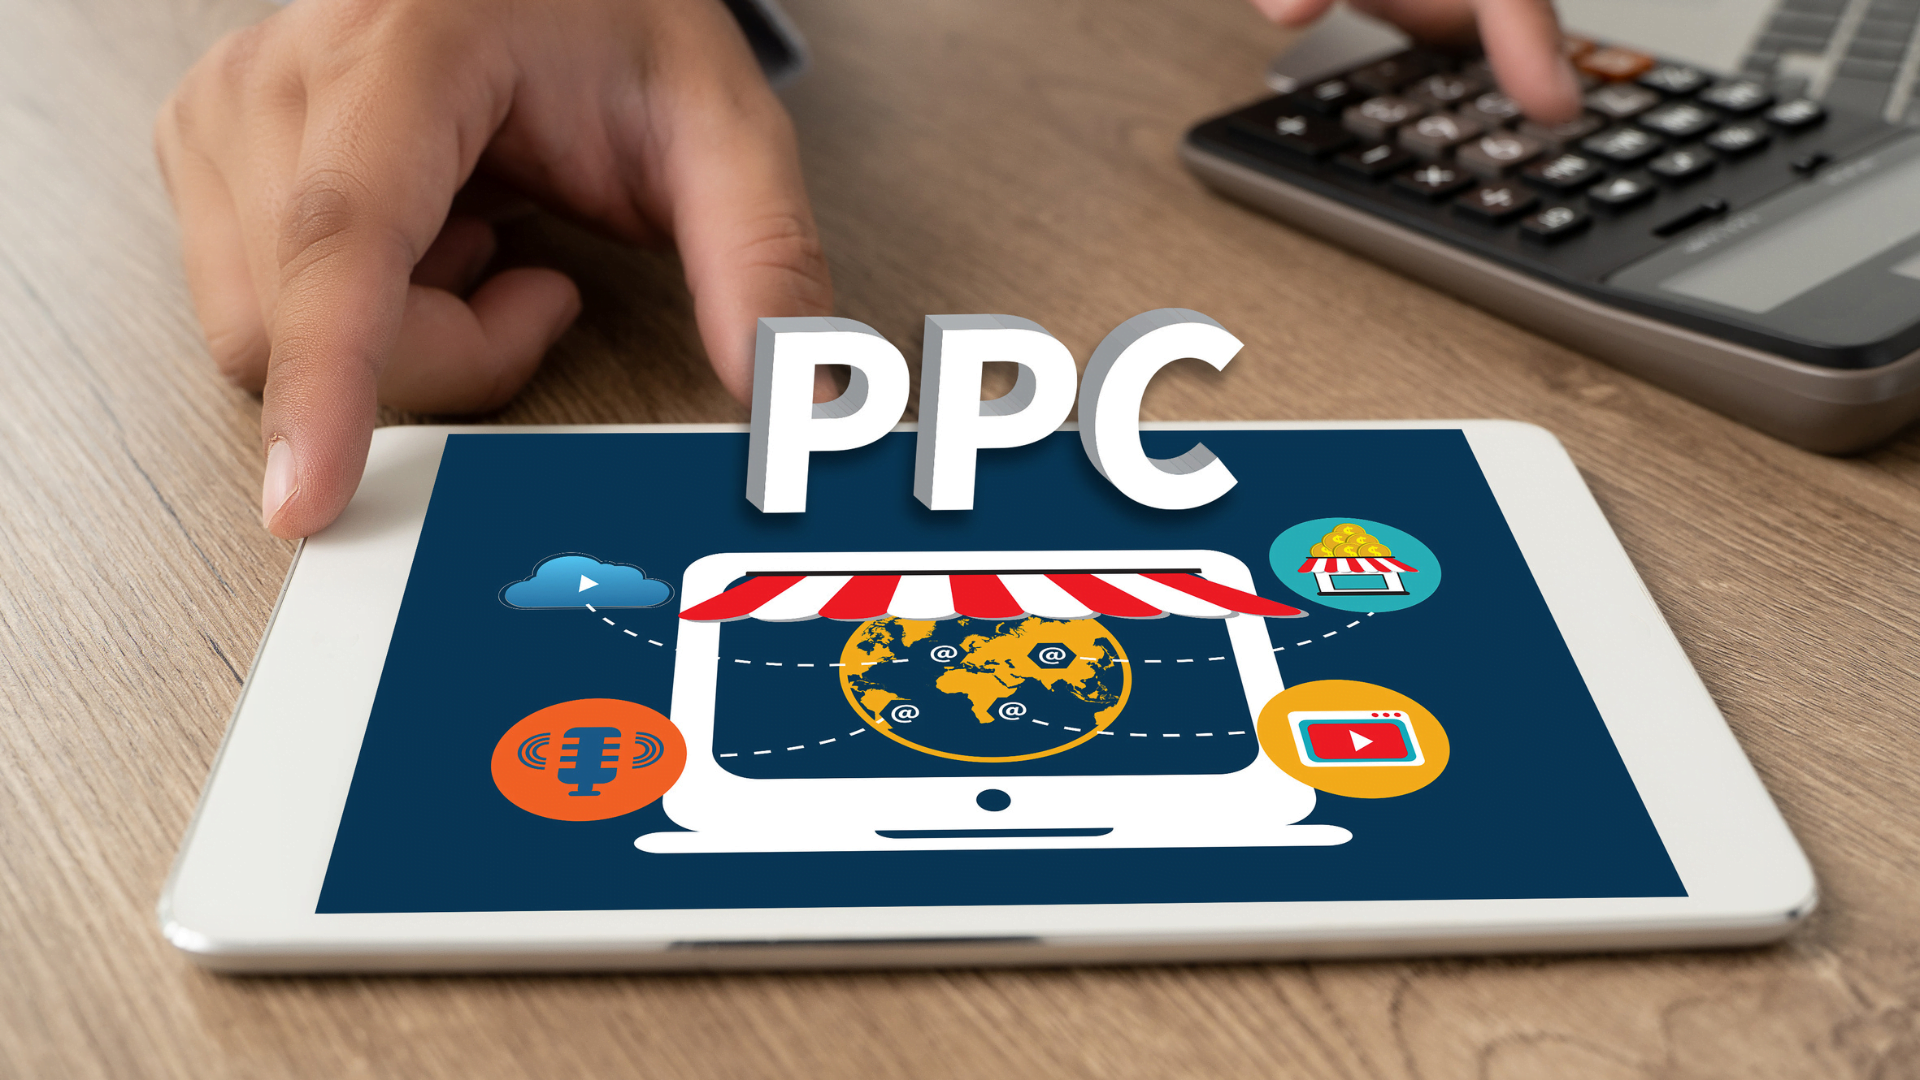 What is Pay-Per-Click Advertising (PPC)? Your Ultimate Guide